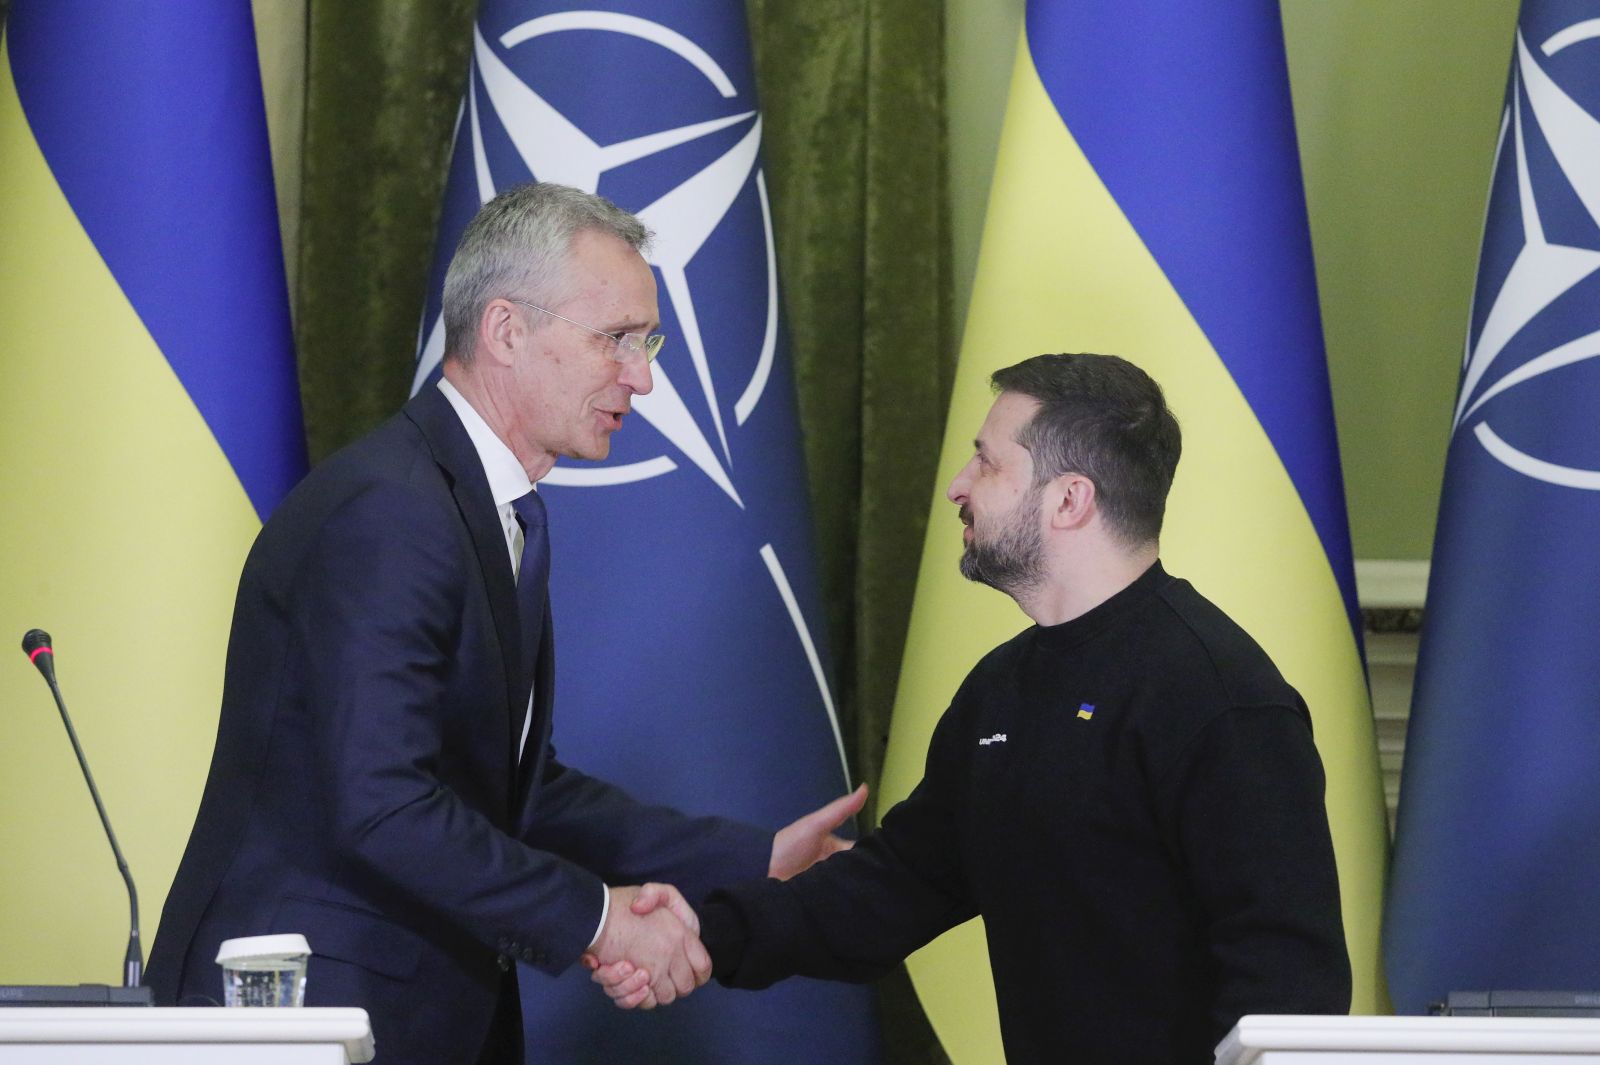 epa10731563 (FILE) - President of Ukraine Volodymyr Zelensky (R) and NATO Secretary General Jens Stoltenberg (L) shake hands during a joint press conference following their meeting in Kyiv (Kiev), Ukraine, 20 April 2023. Stoltenberg's visit to Kyiv was not announced. It is the first time the NATO chief visits Ukraine since Russia began its full-scale invasion of the country in February 2022.  EPA/SERGEY DOLZHENKO